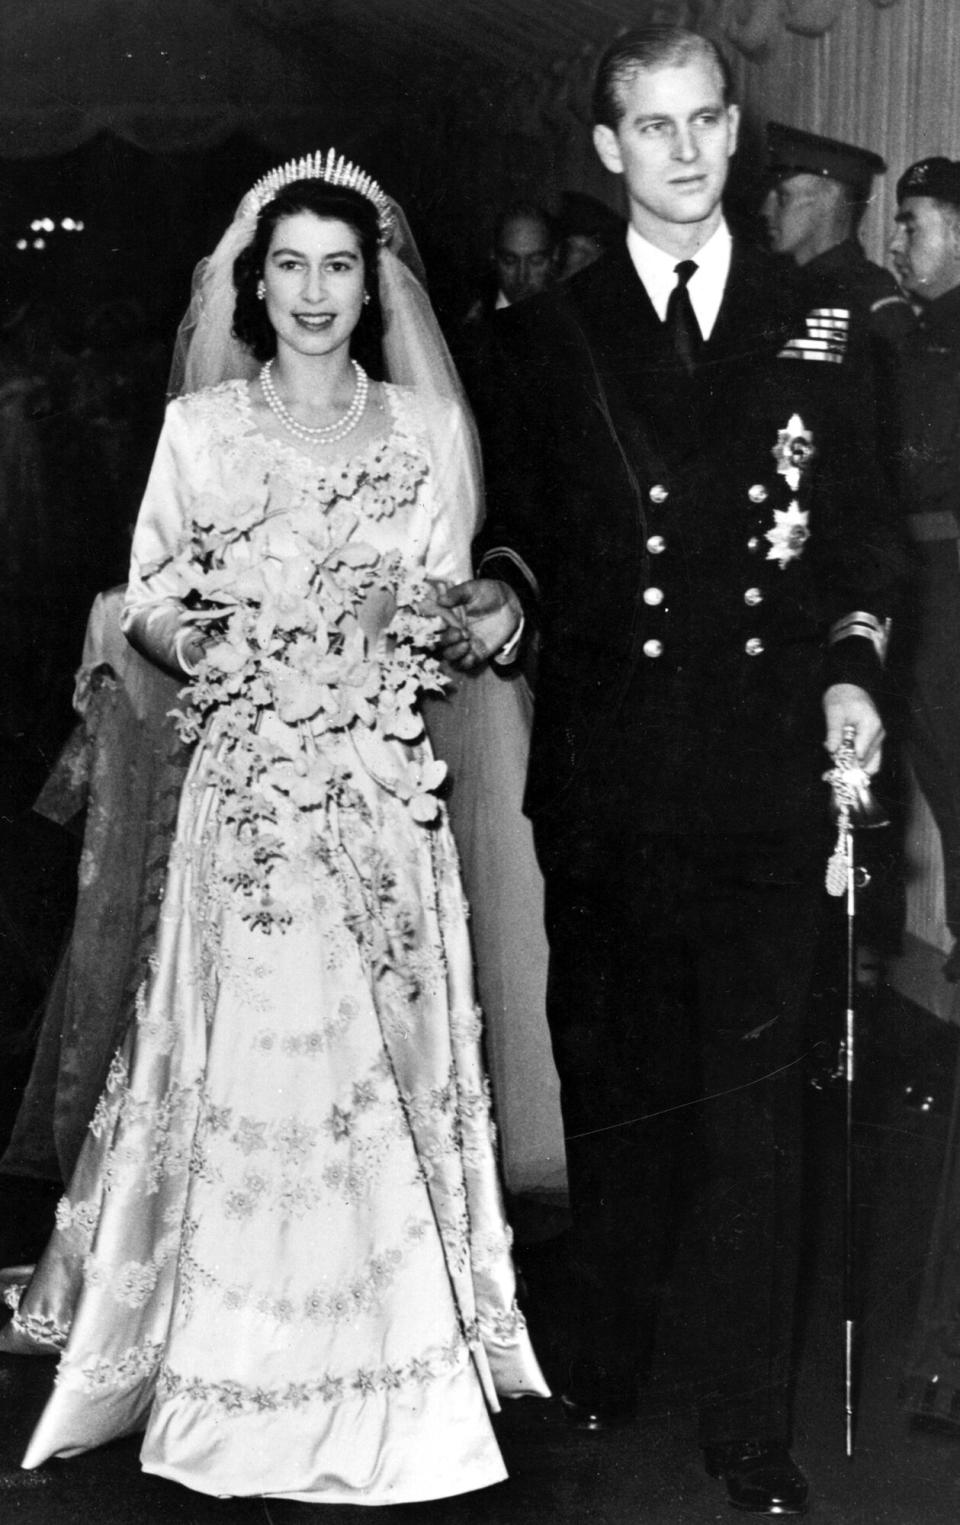 Queen Elizabeth II, as Princess Elizabeth, and her husband the Duke of Edinburgh, styled Prince Philip in 1957, on their wedding day. She became queen on her father King George VI's death in 1952